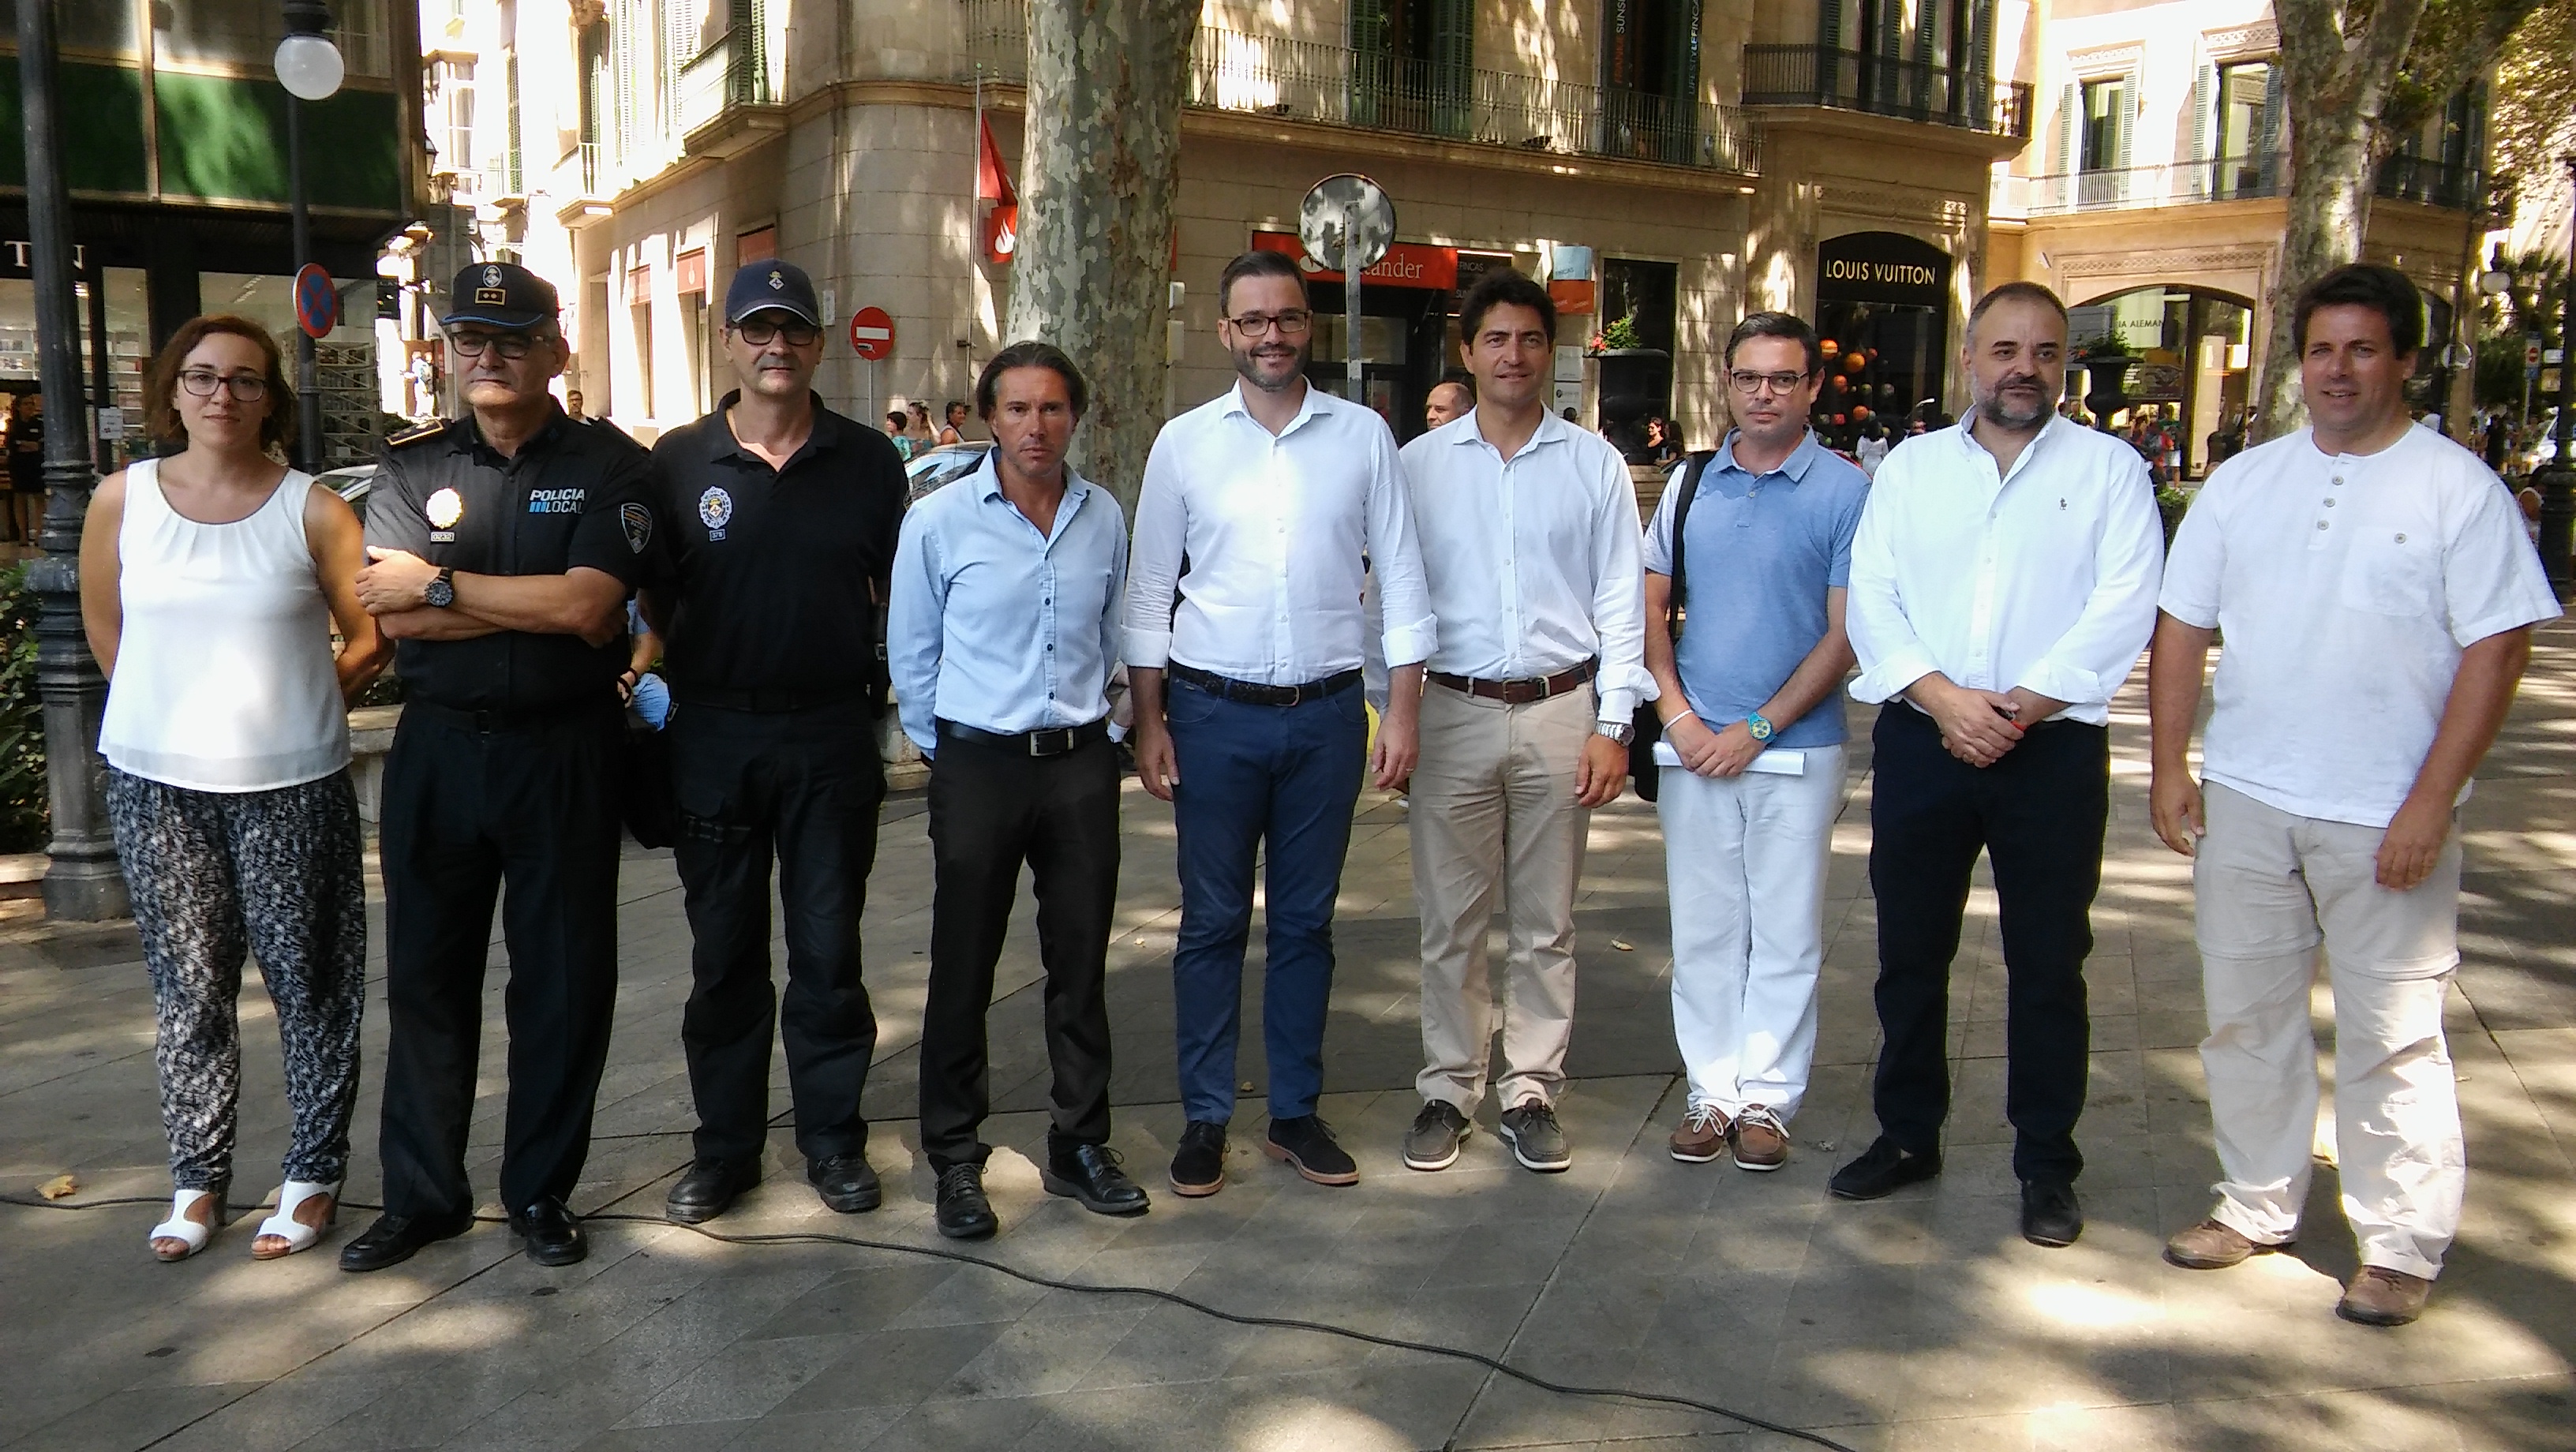 The APB collaborates with the installation of the public Wi-Fi network in Palma